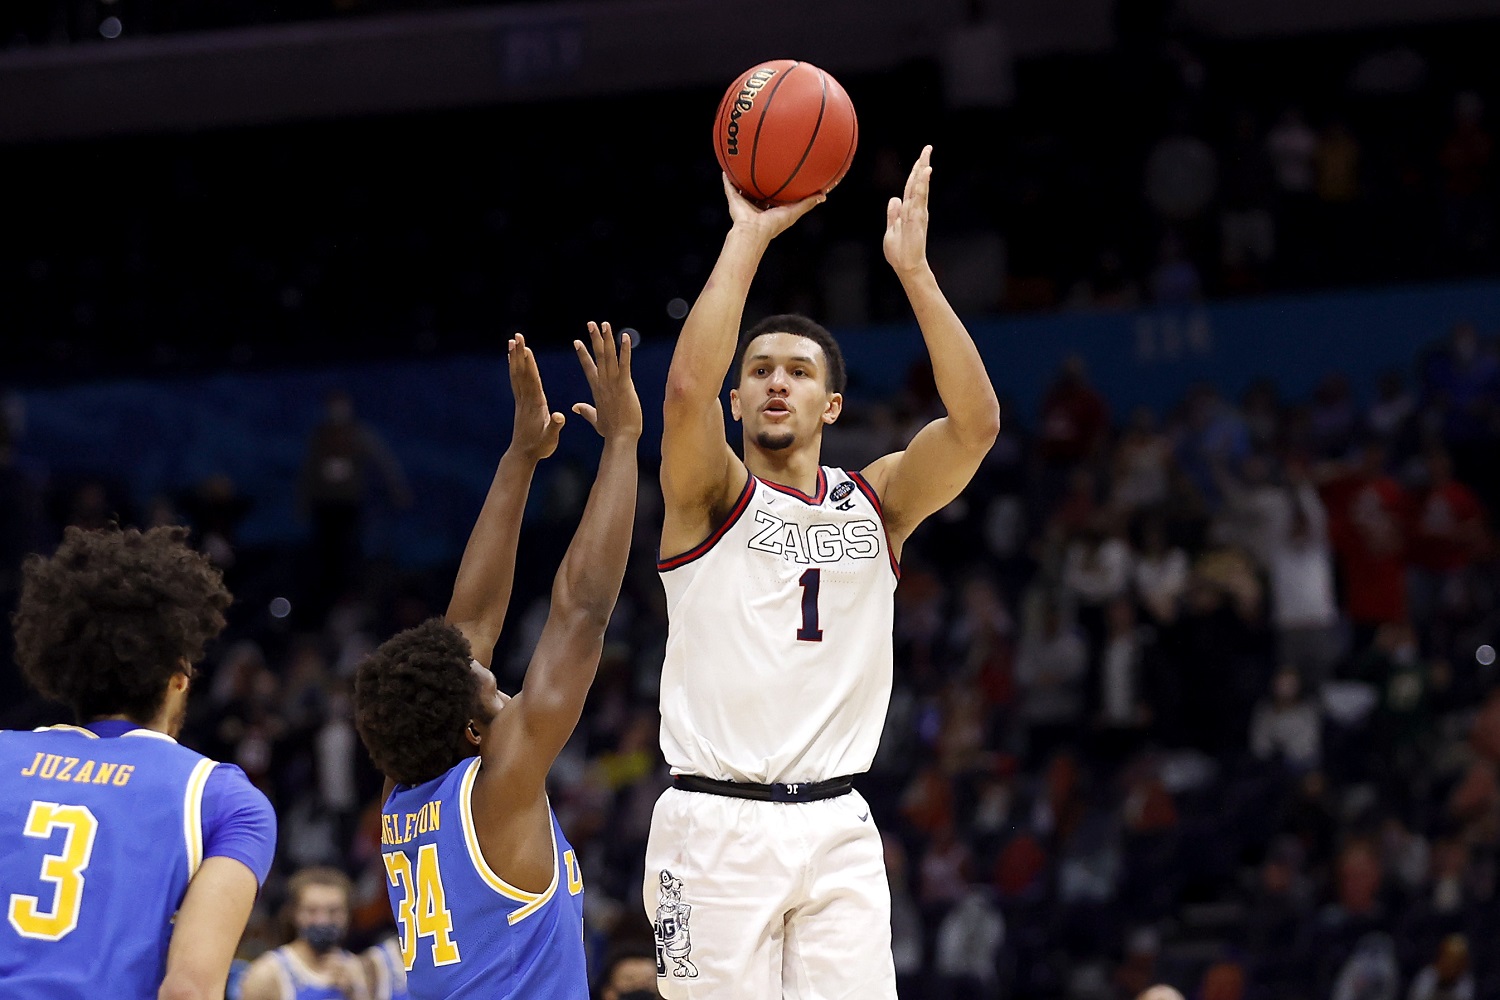 Jalen Suggs of the Gonzaga Bulldogs shoots the game-winning 3-pointer in overtime to defeat the UCLA Bruins, 93-90, during the 2021 NCAA Tournament semifinal at Lucas Oil Stadium in Indianapolis. | Photo by Jamie Squire/Getty Images